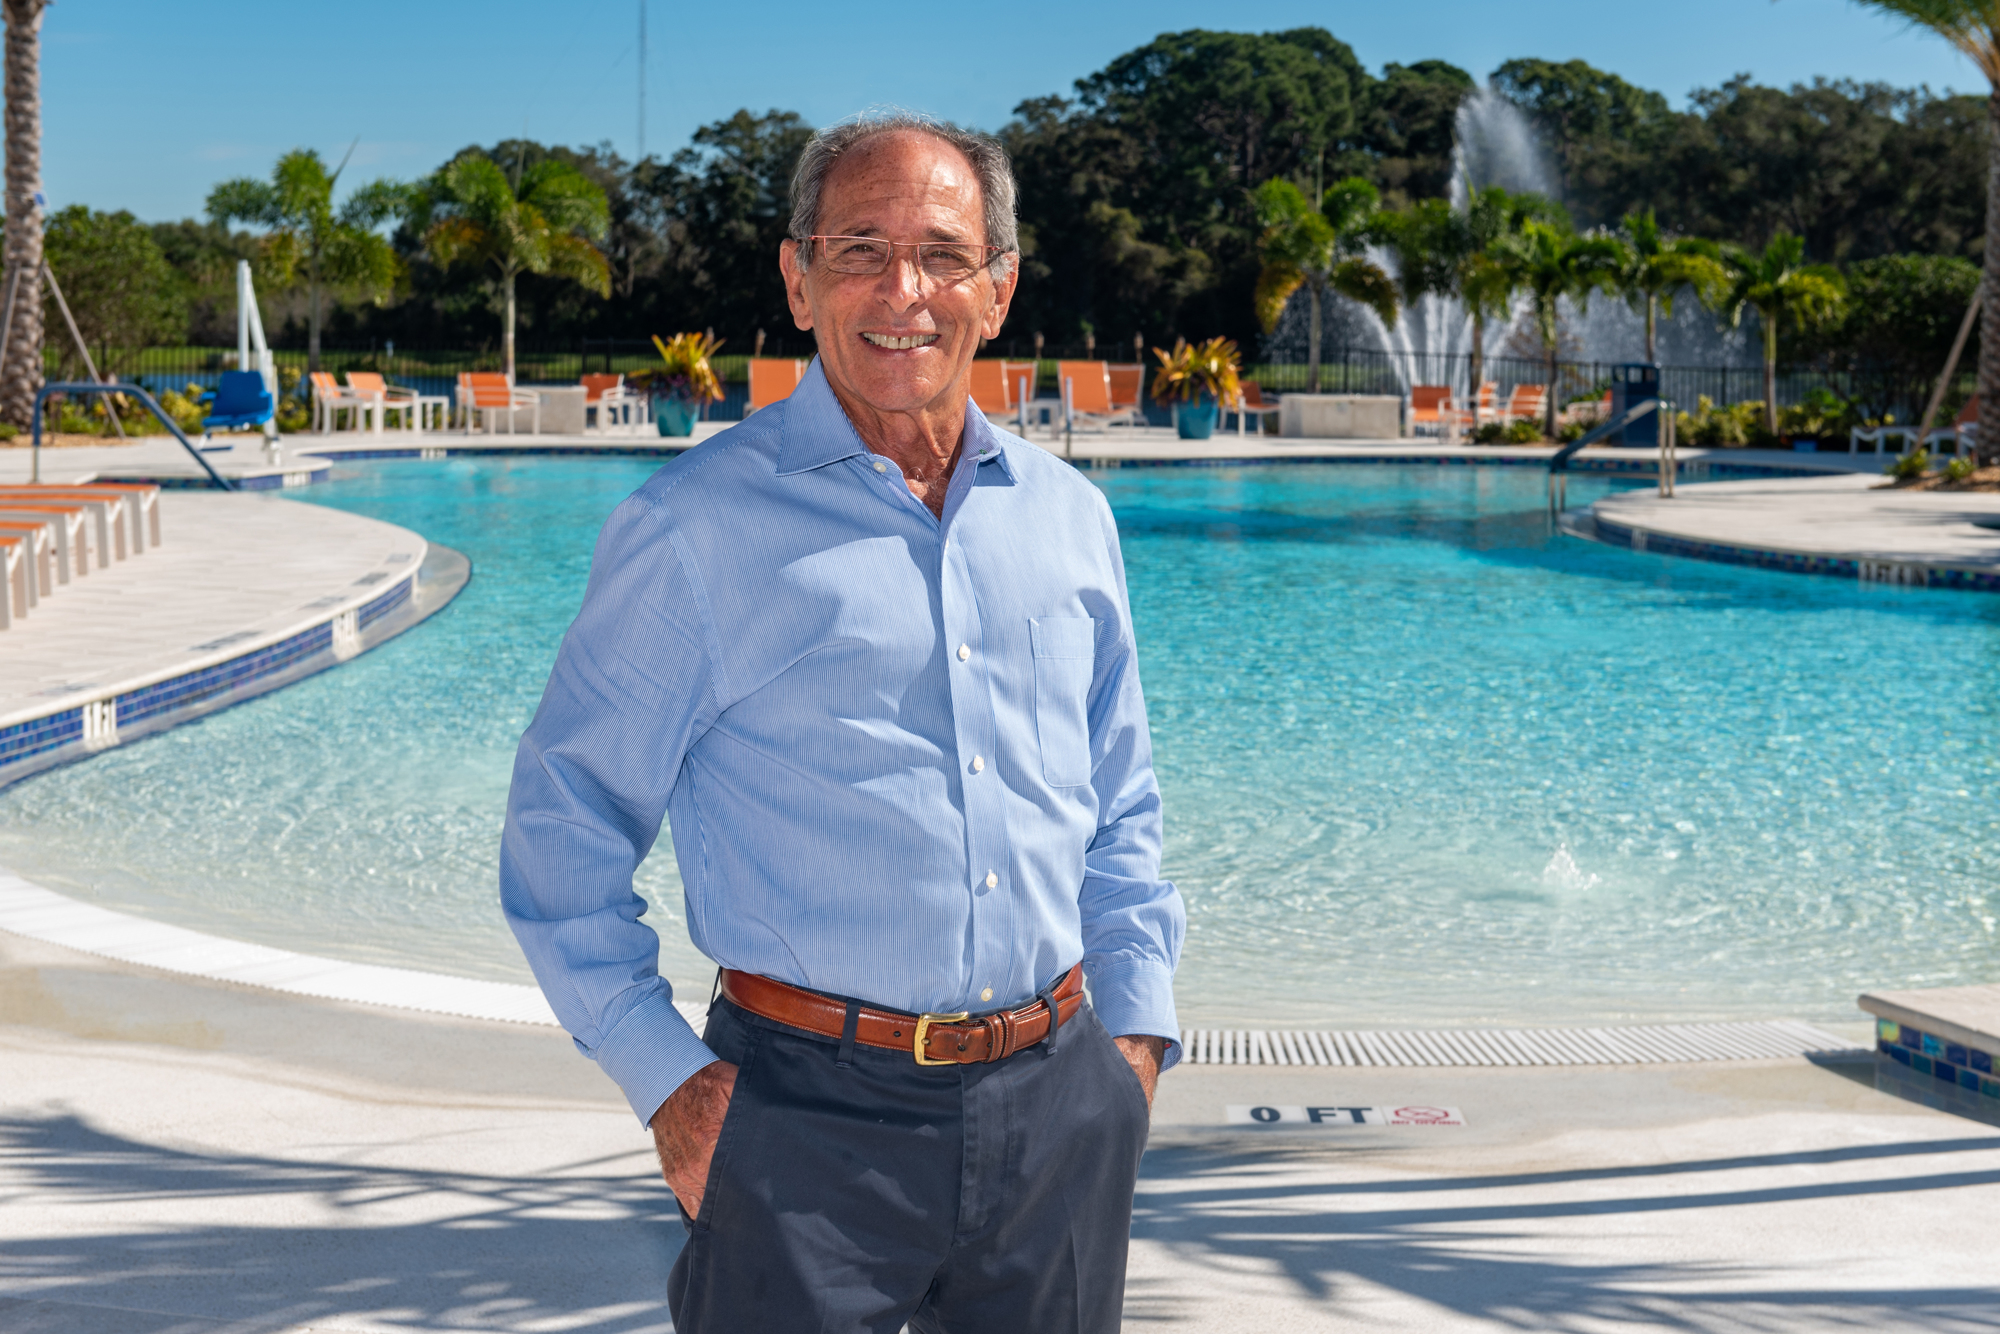 Lori Sax. The Floridian Club of Sarasota, which opened earlier this year, offers a new kind of residential model for the 55+ crowd, says developer Larry Lieberman: leasing units.